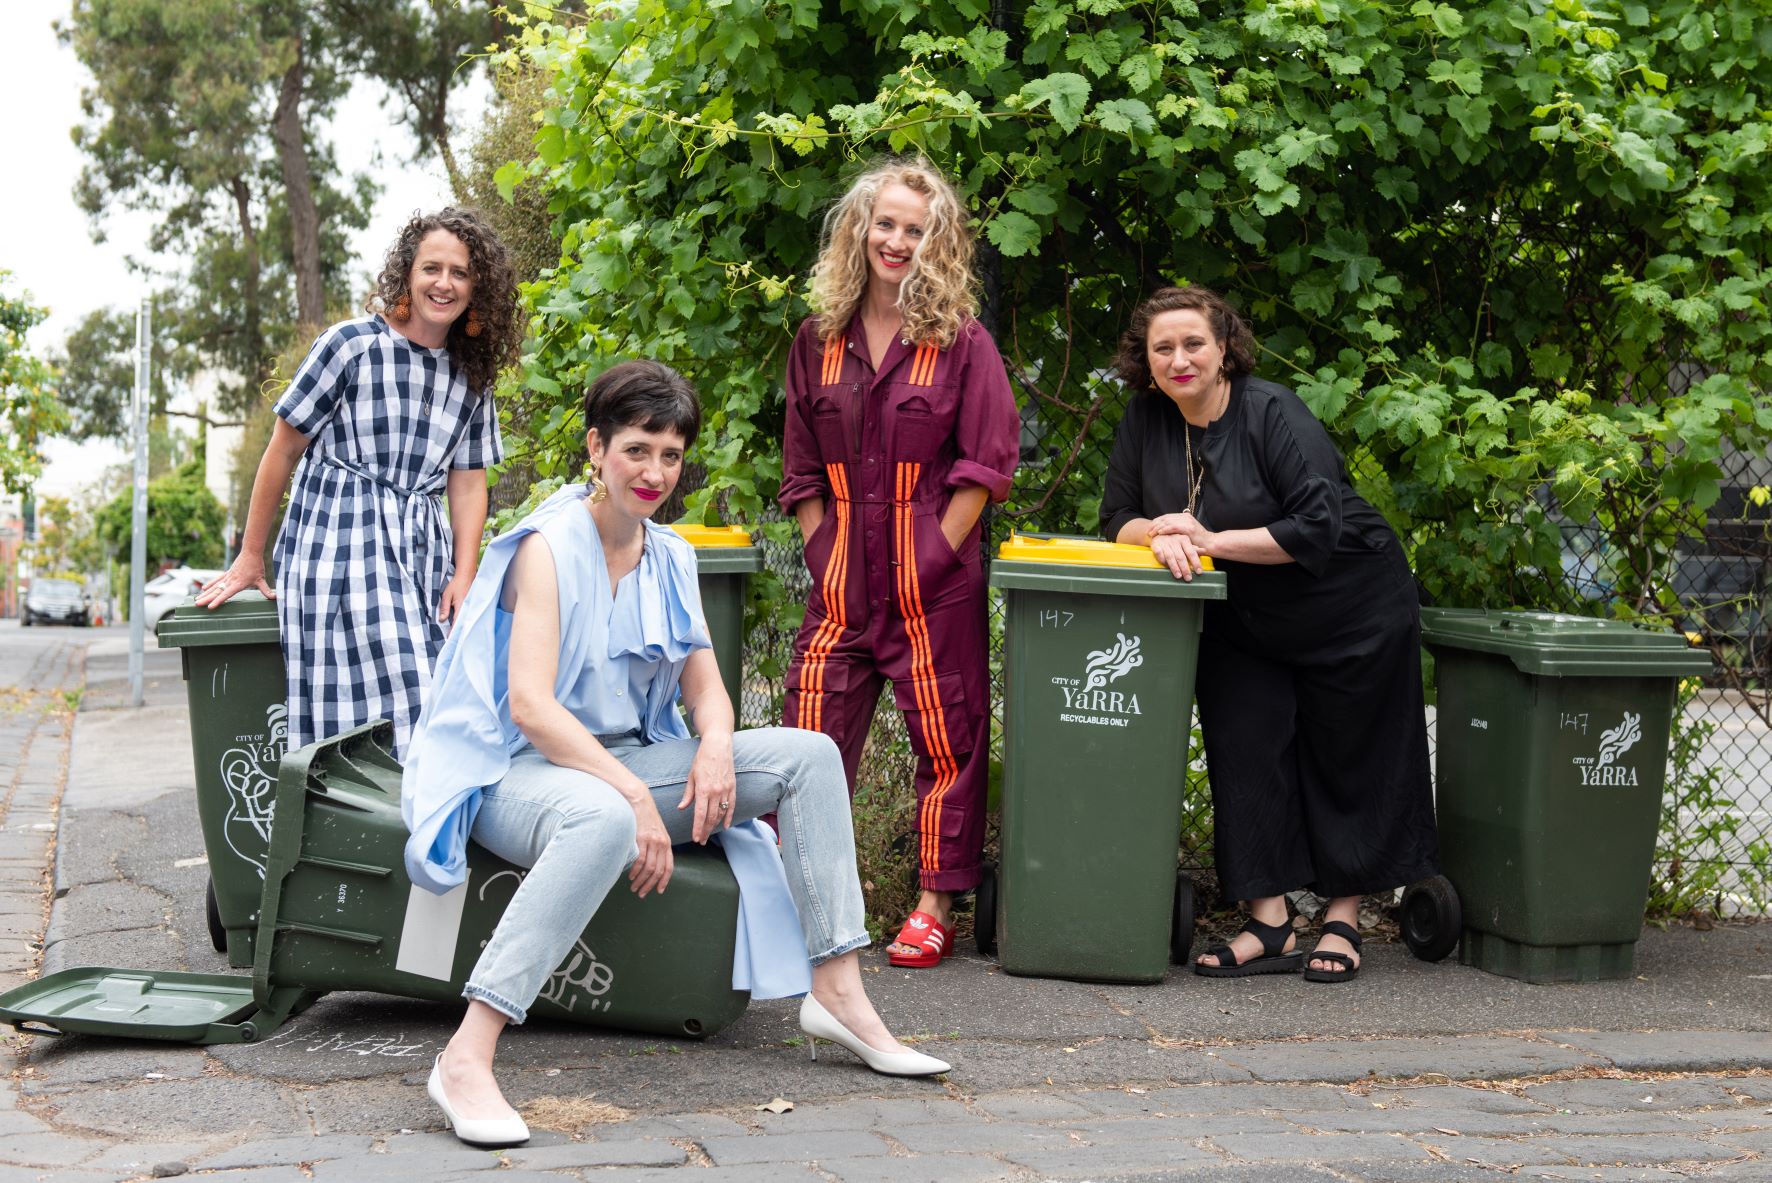 Hotham St Ladies. There are four people standing and sitting amongst a range of Yarra recycling bins. They are all smiling and looking at the camera. 